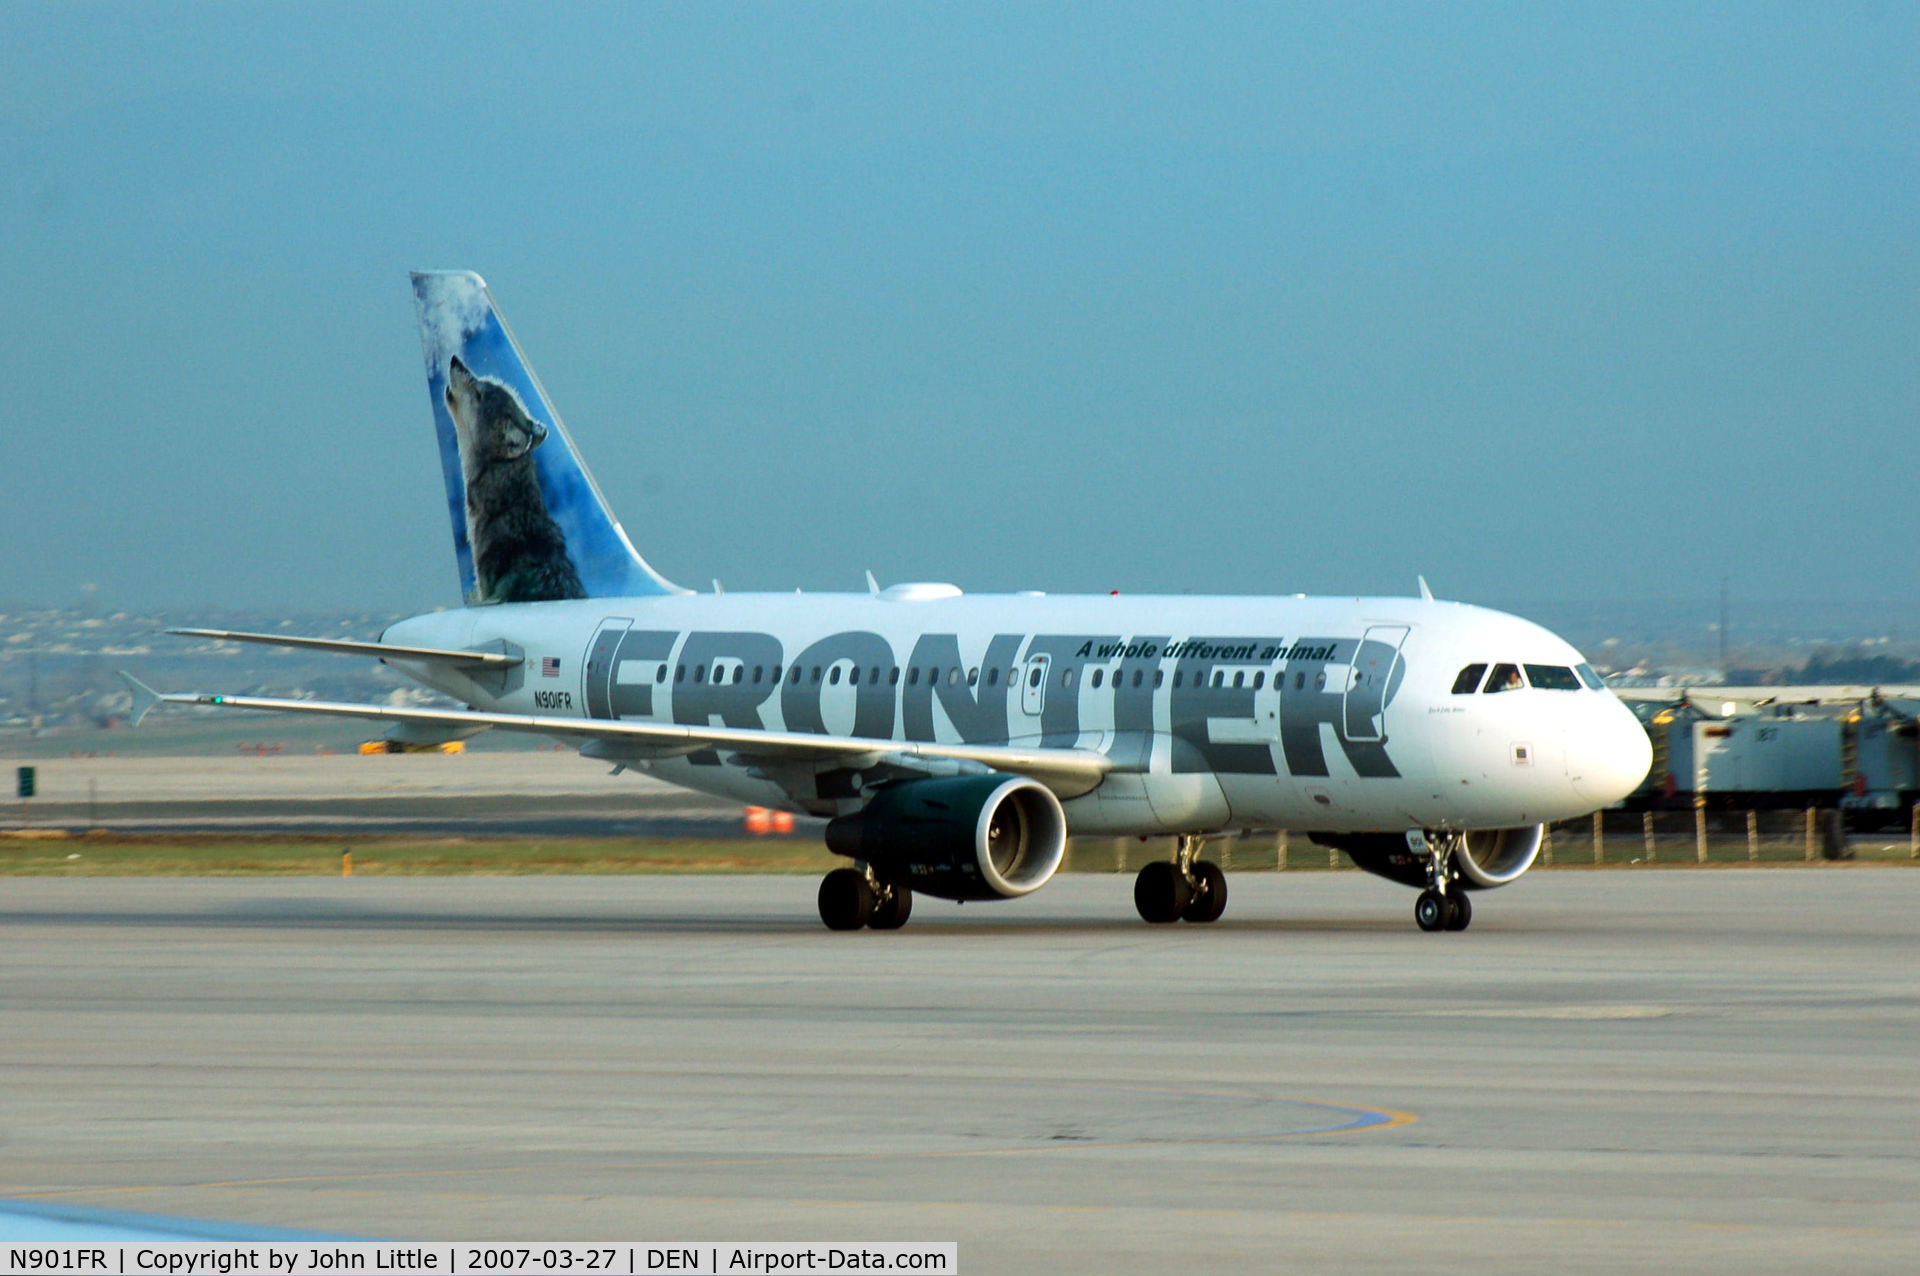 N901FR, 2001 Airbus A319-111 C/N 1488, Frontier Airlines taxi to gate at DIA